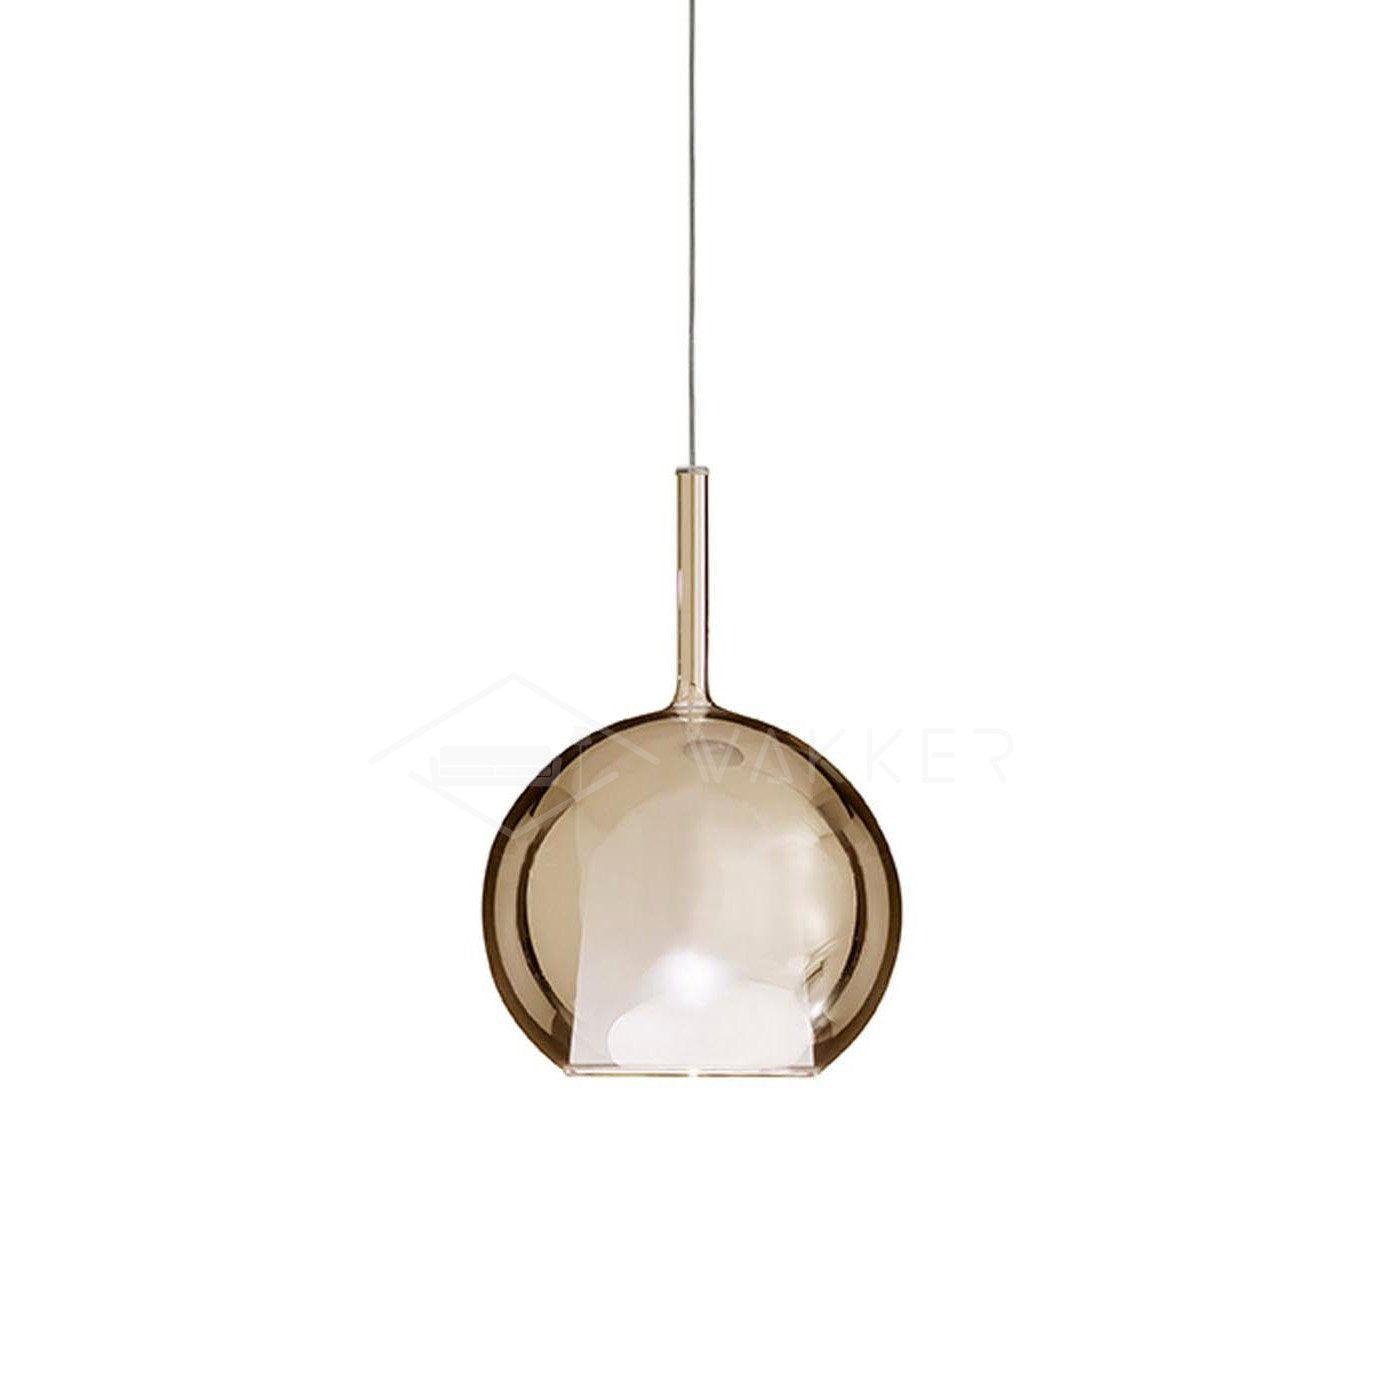 Light Amber Glo Pendant Light with a diameter of 9.8 inches and a height of 16.9 inches (25cm x 43cm).